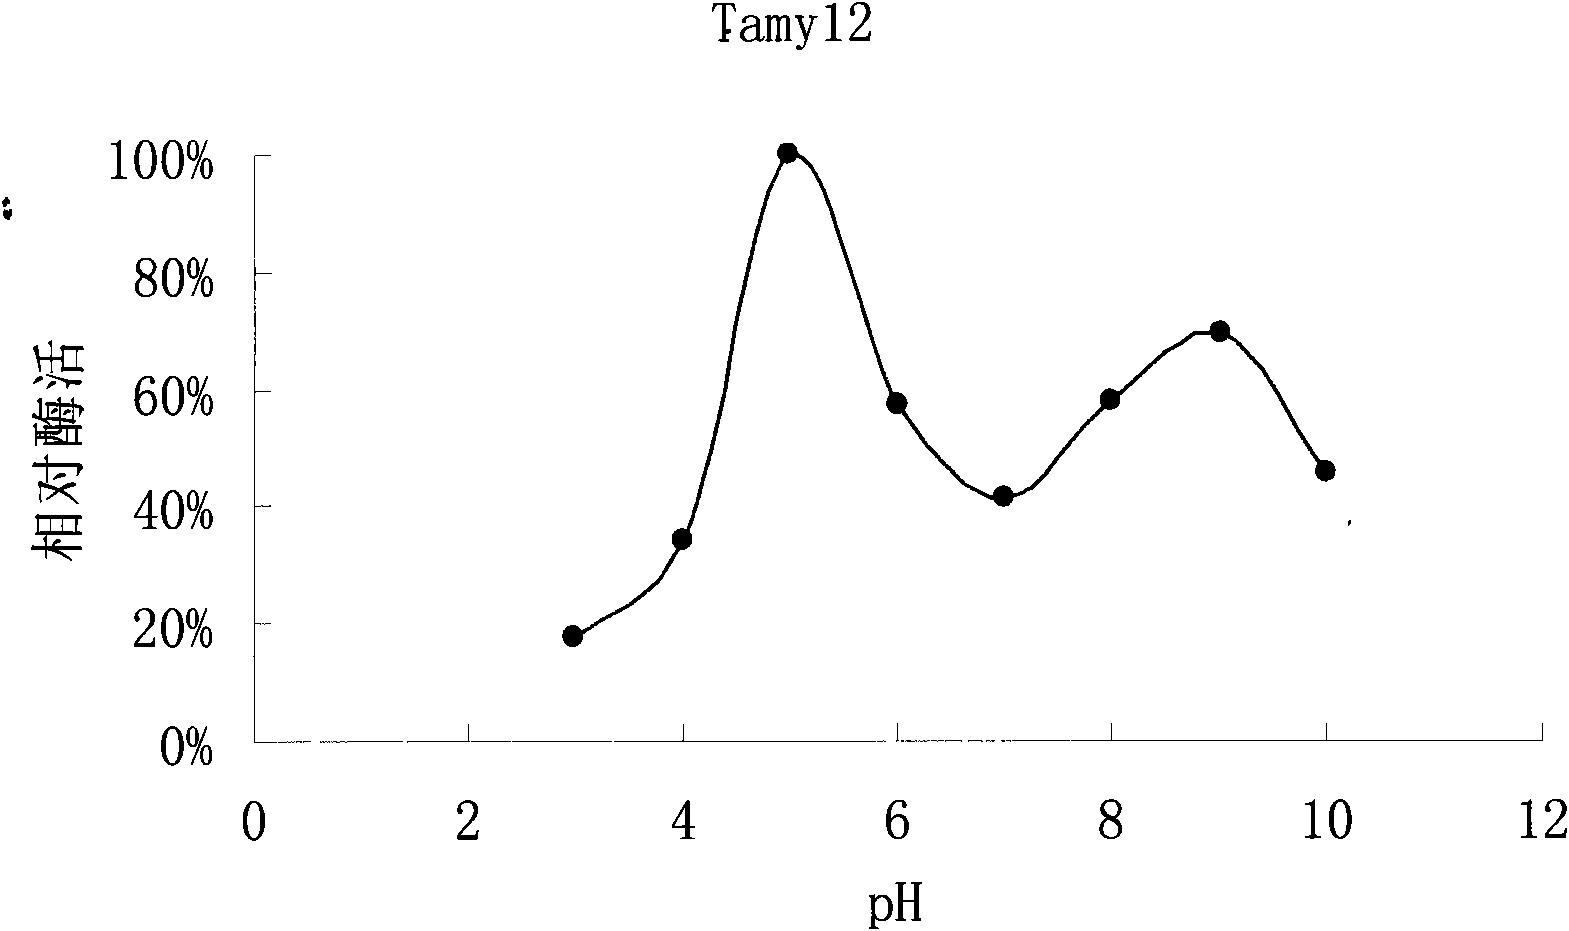 Thermophilic bacillus pumilus strain Tamy12 and high-temperature amylase produced by same